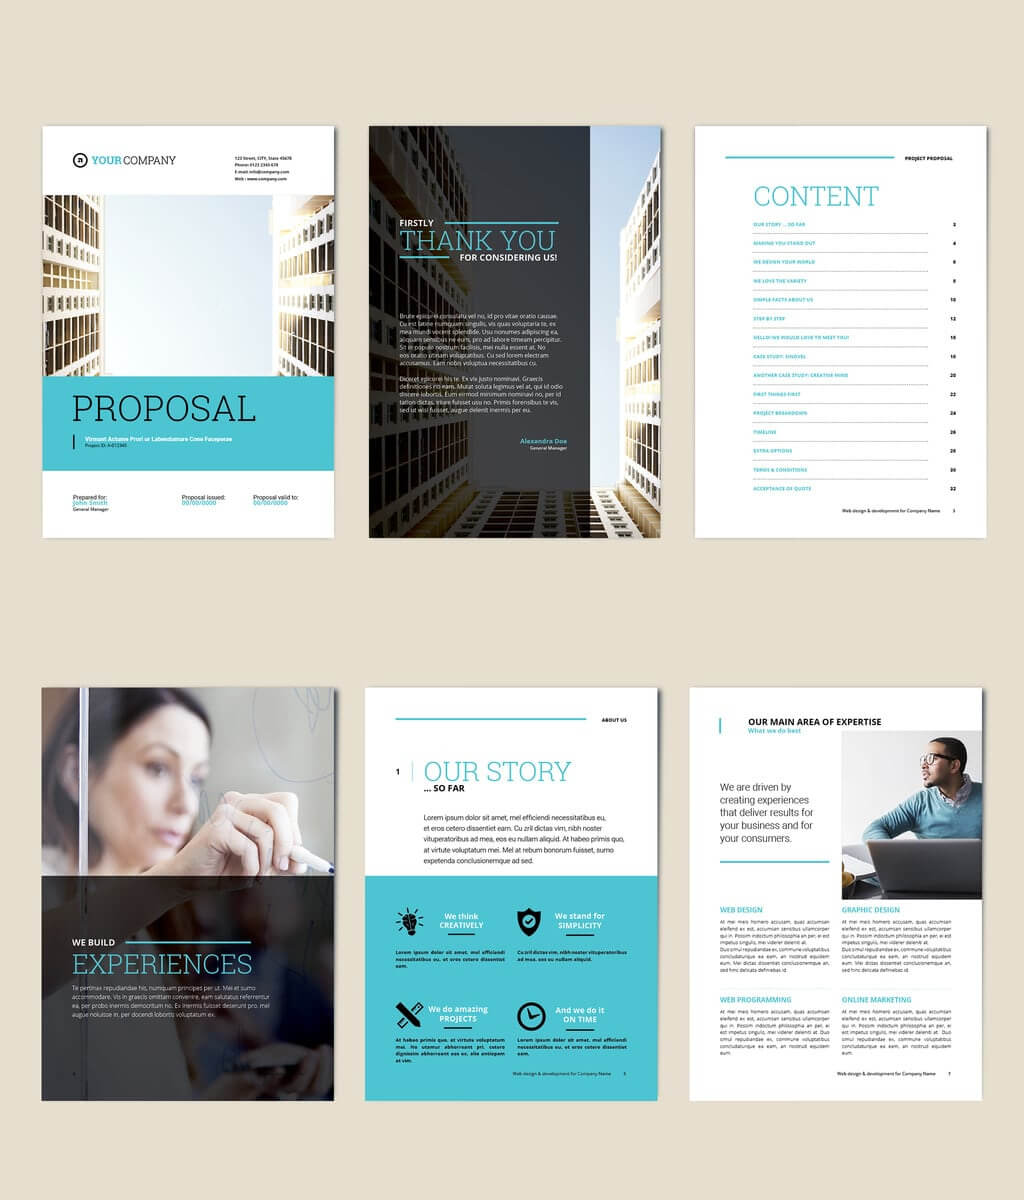 75 Fresh Indesign Templates And Where To Find More Intended For Free Indesign Report Templates